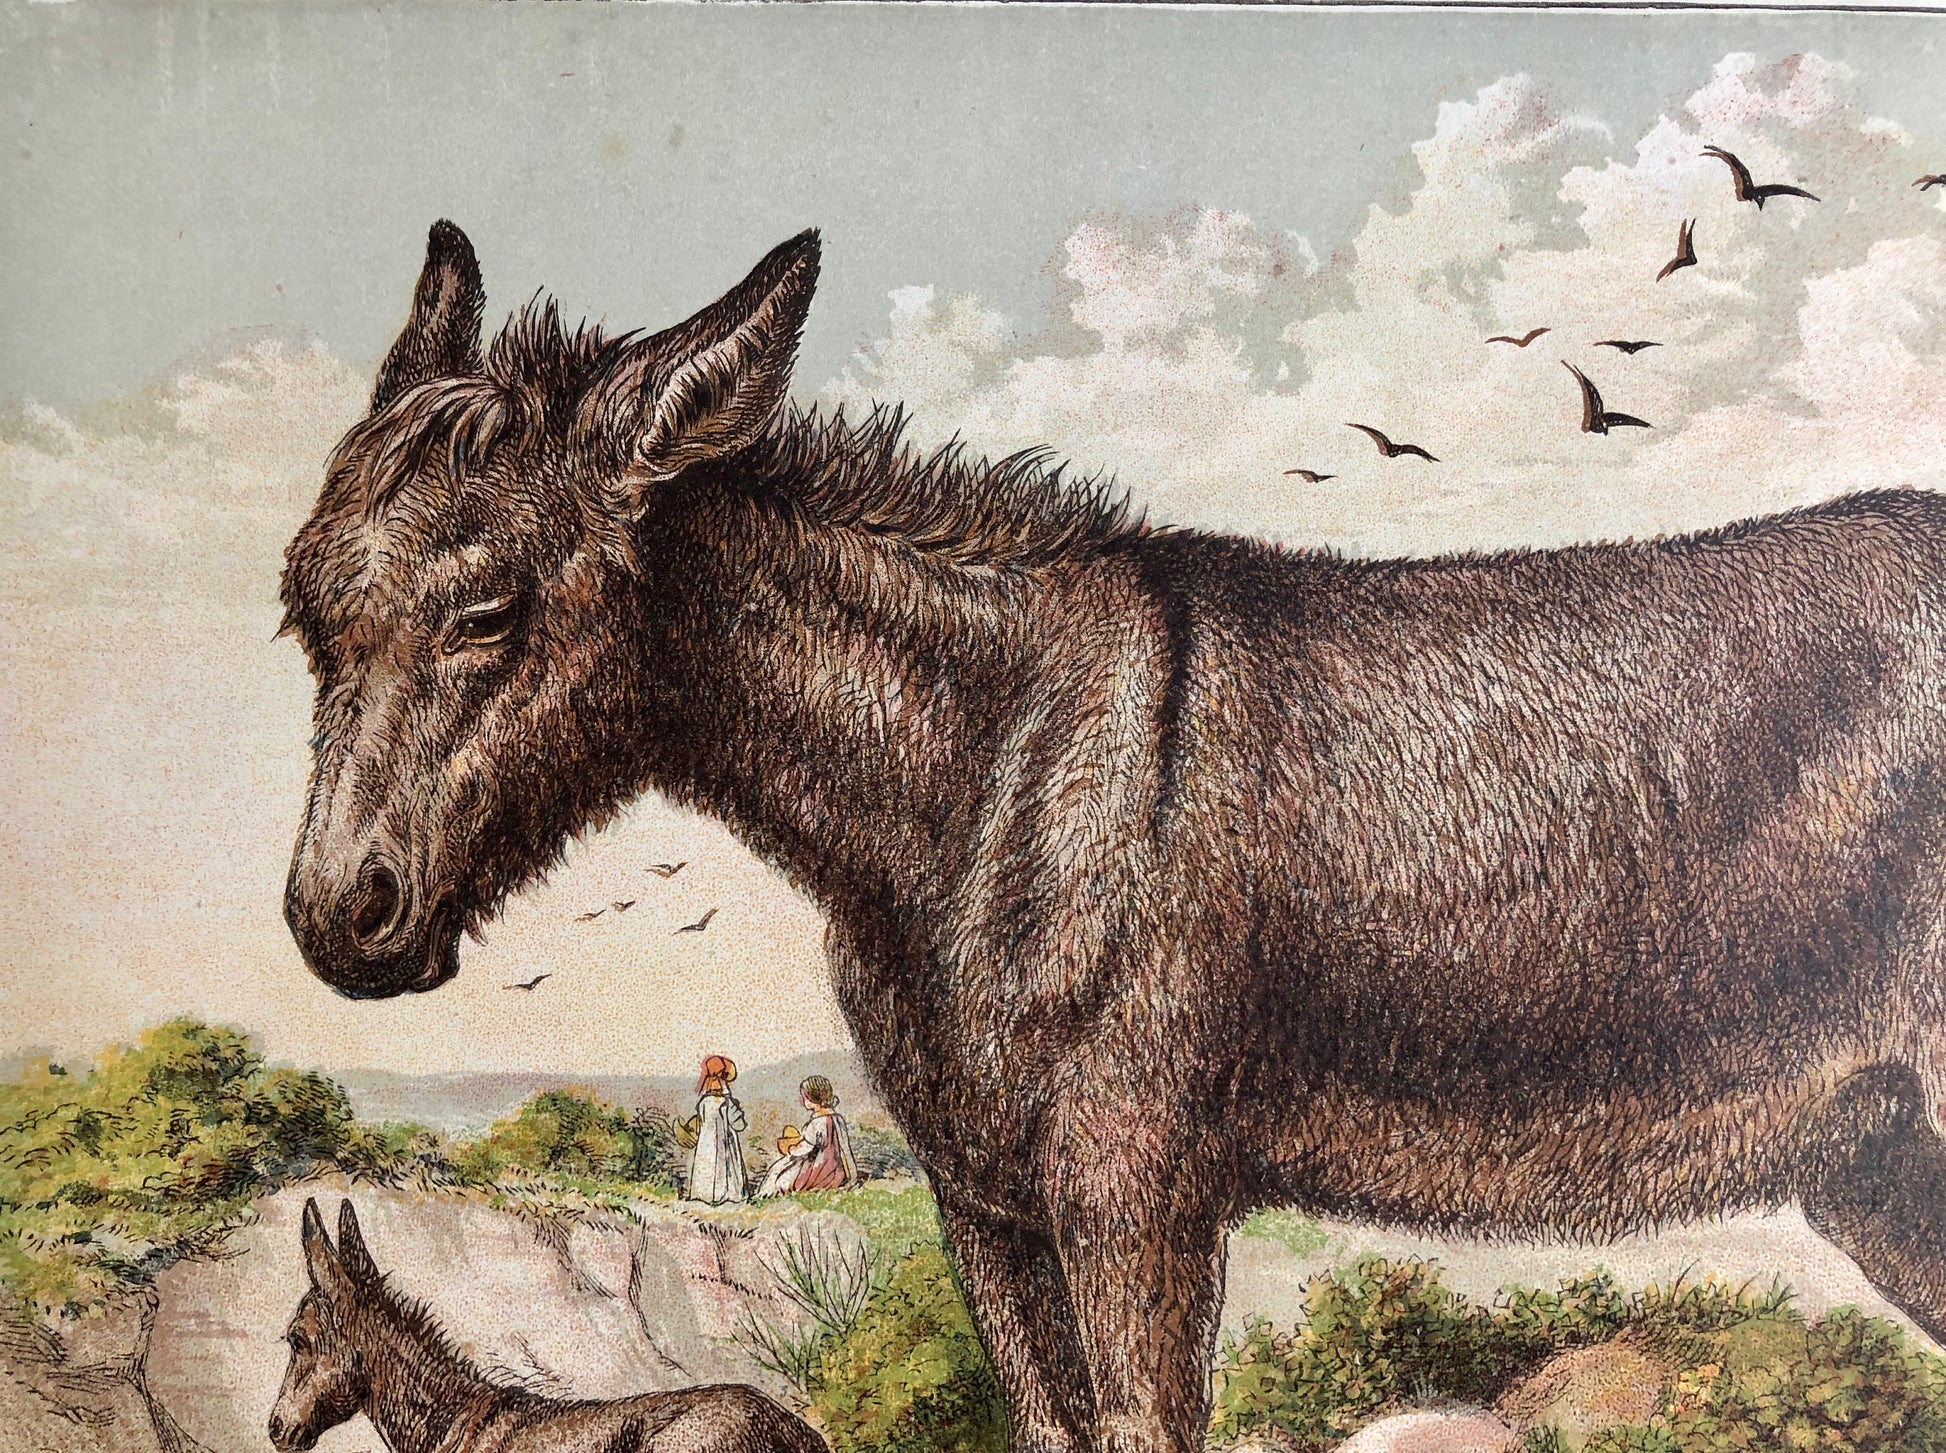 The Donkey (L’Ane). A Large chromolithograph print from Les Animaux Domestiques by Mme Pape-Carpantier. Dated 1872. Size: 24.5 x 21.5 cms.